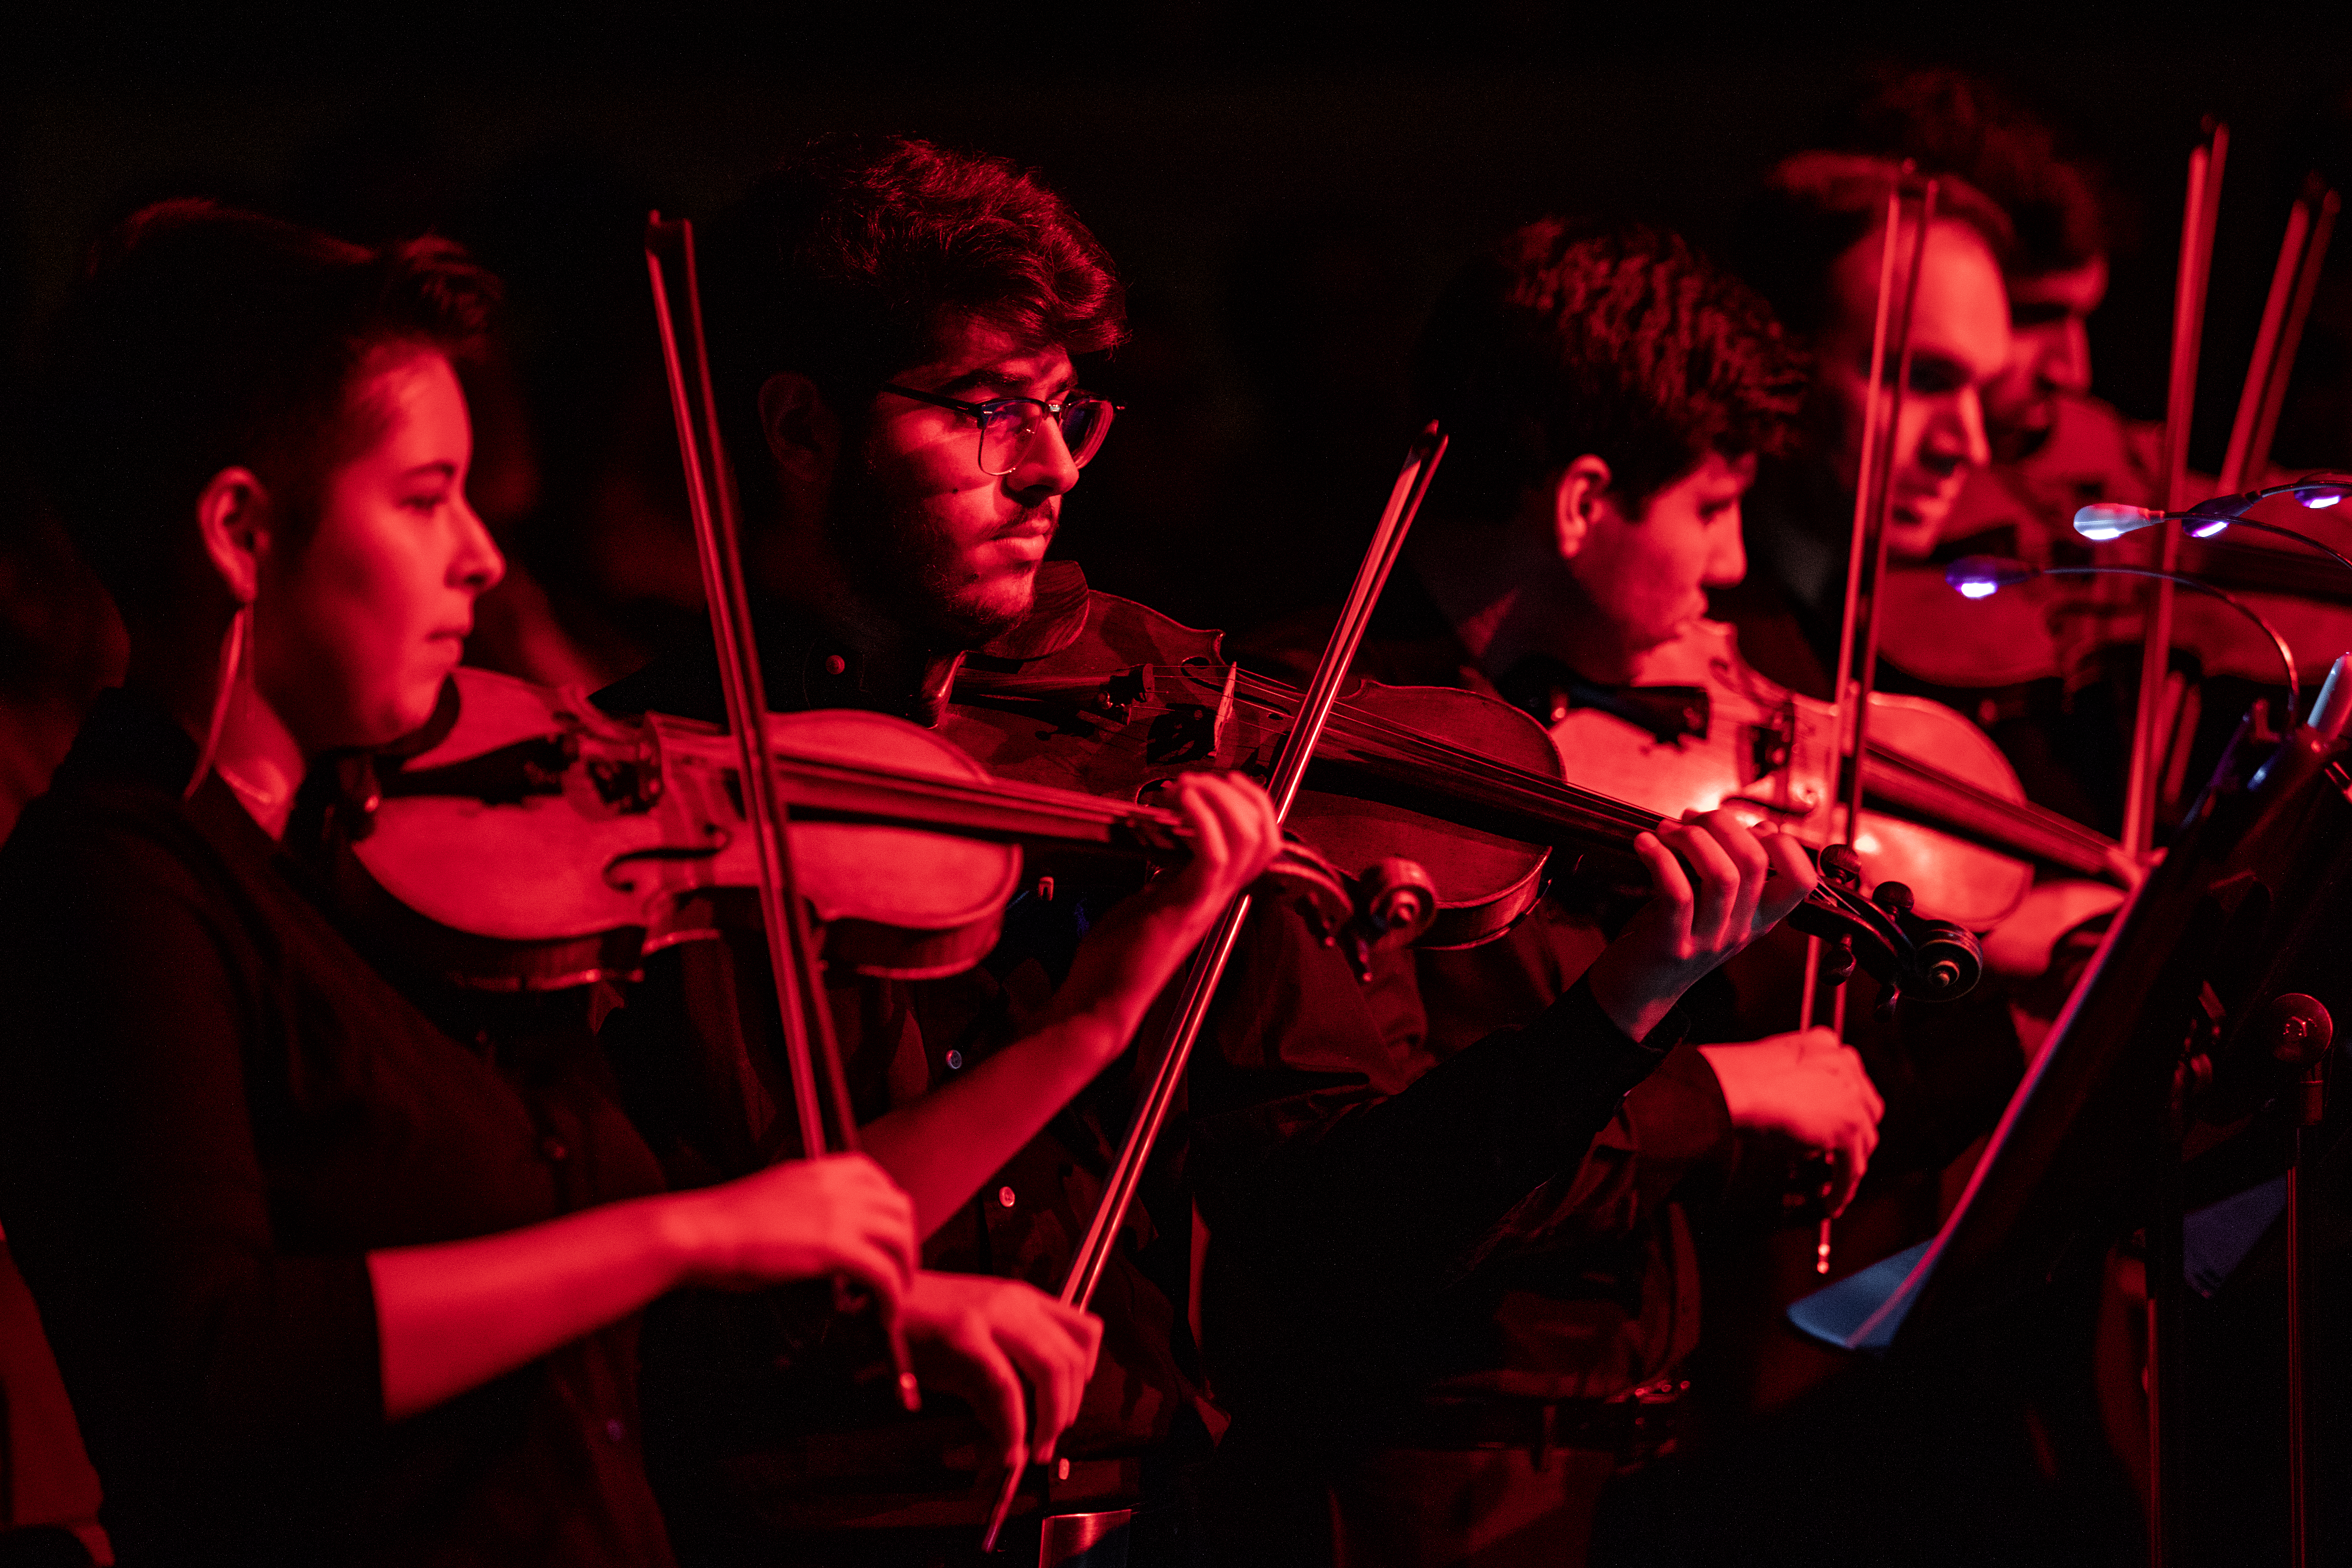 Violinists perform, bathed in red light.